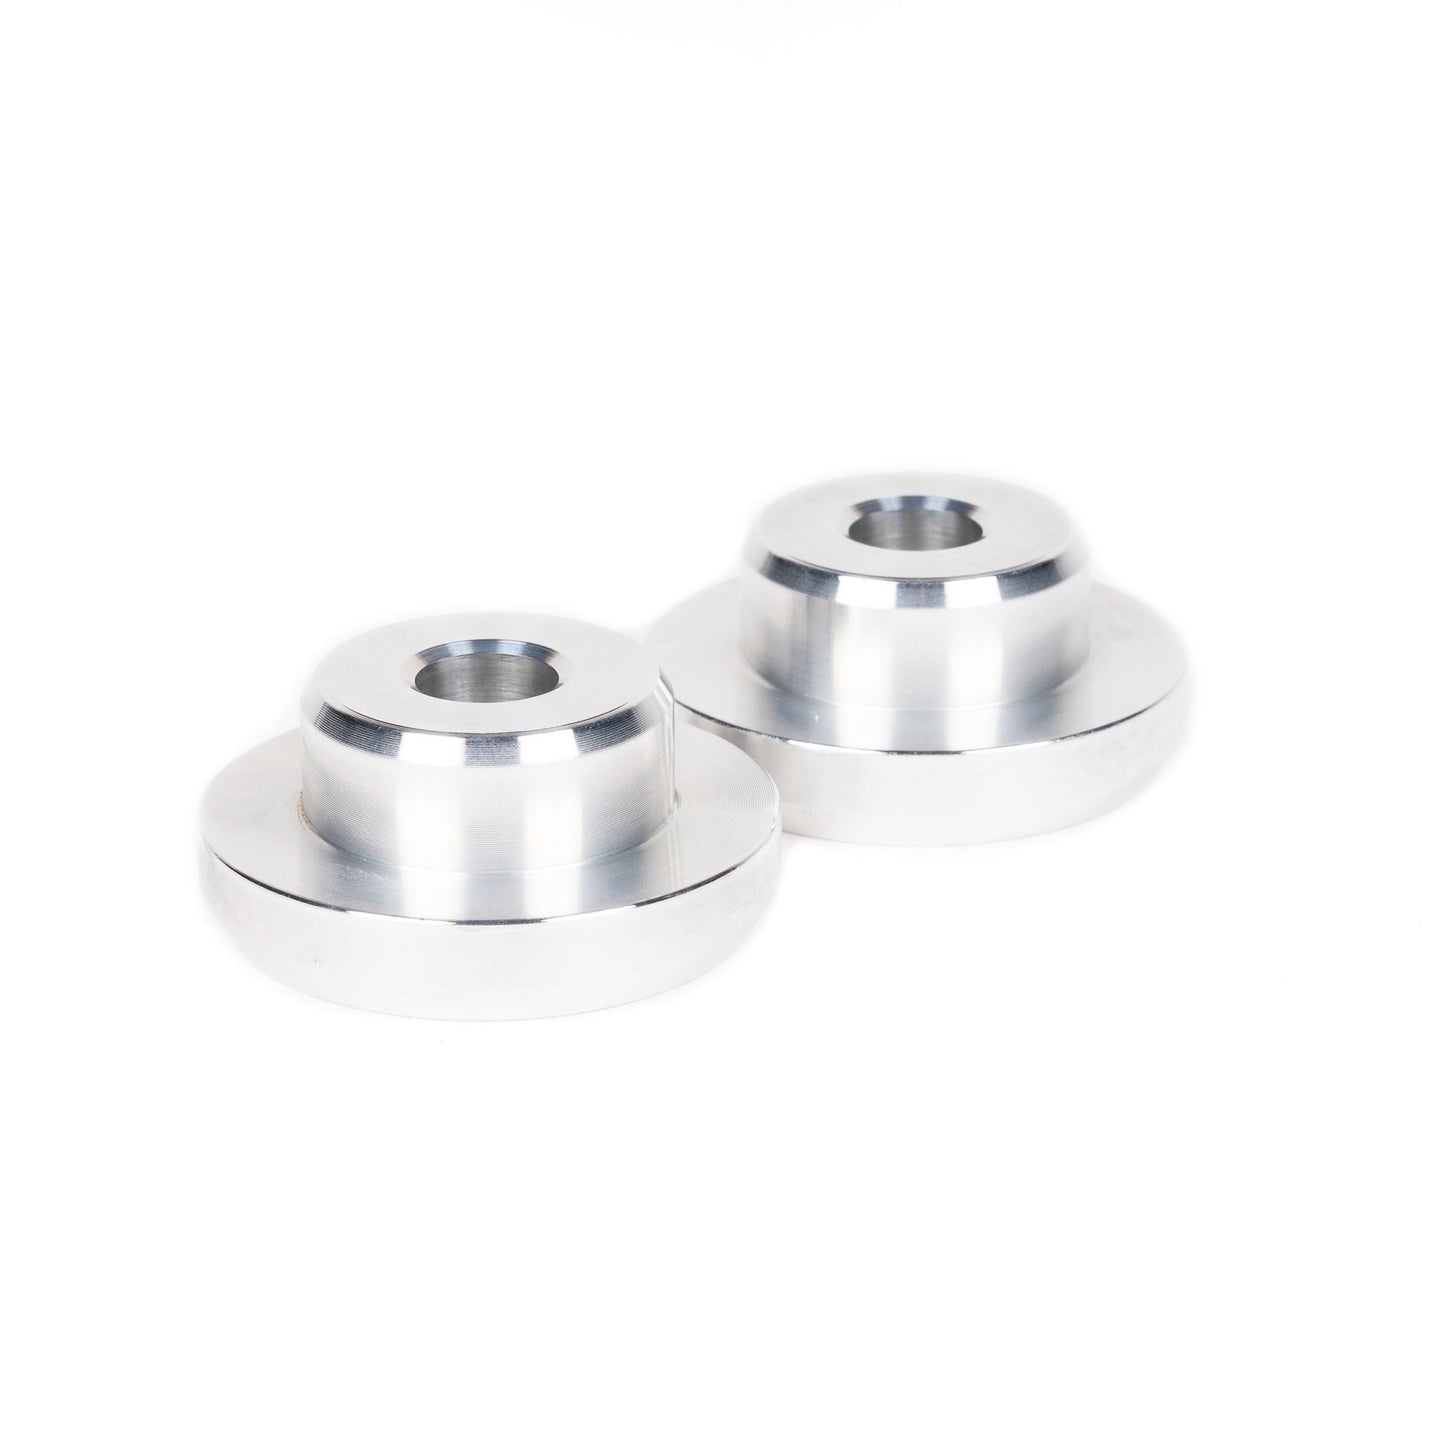 Voodoo13 Differential Bushings - SDNS-0100